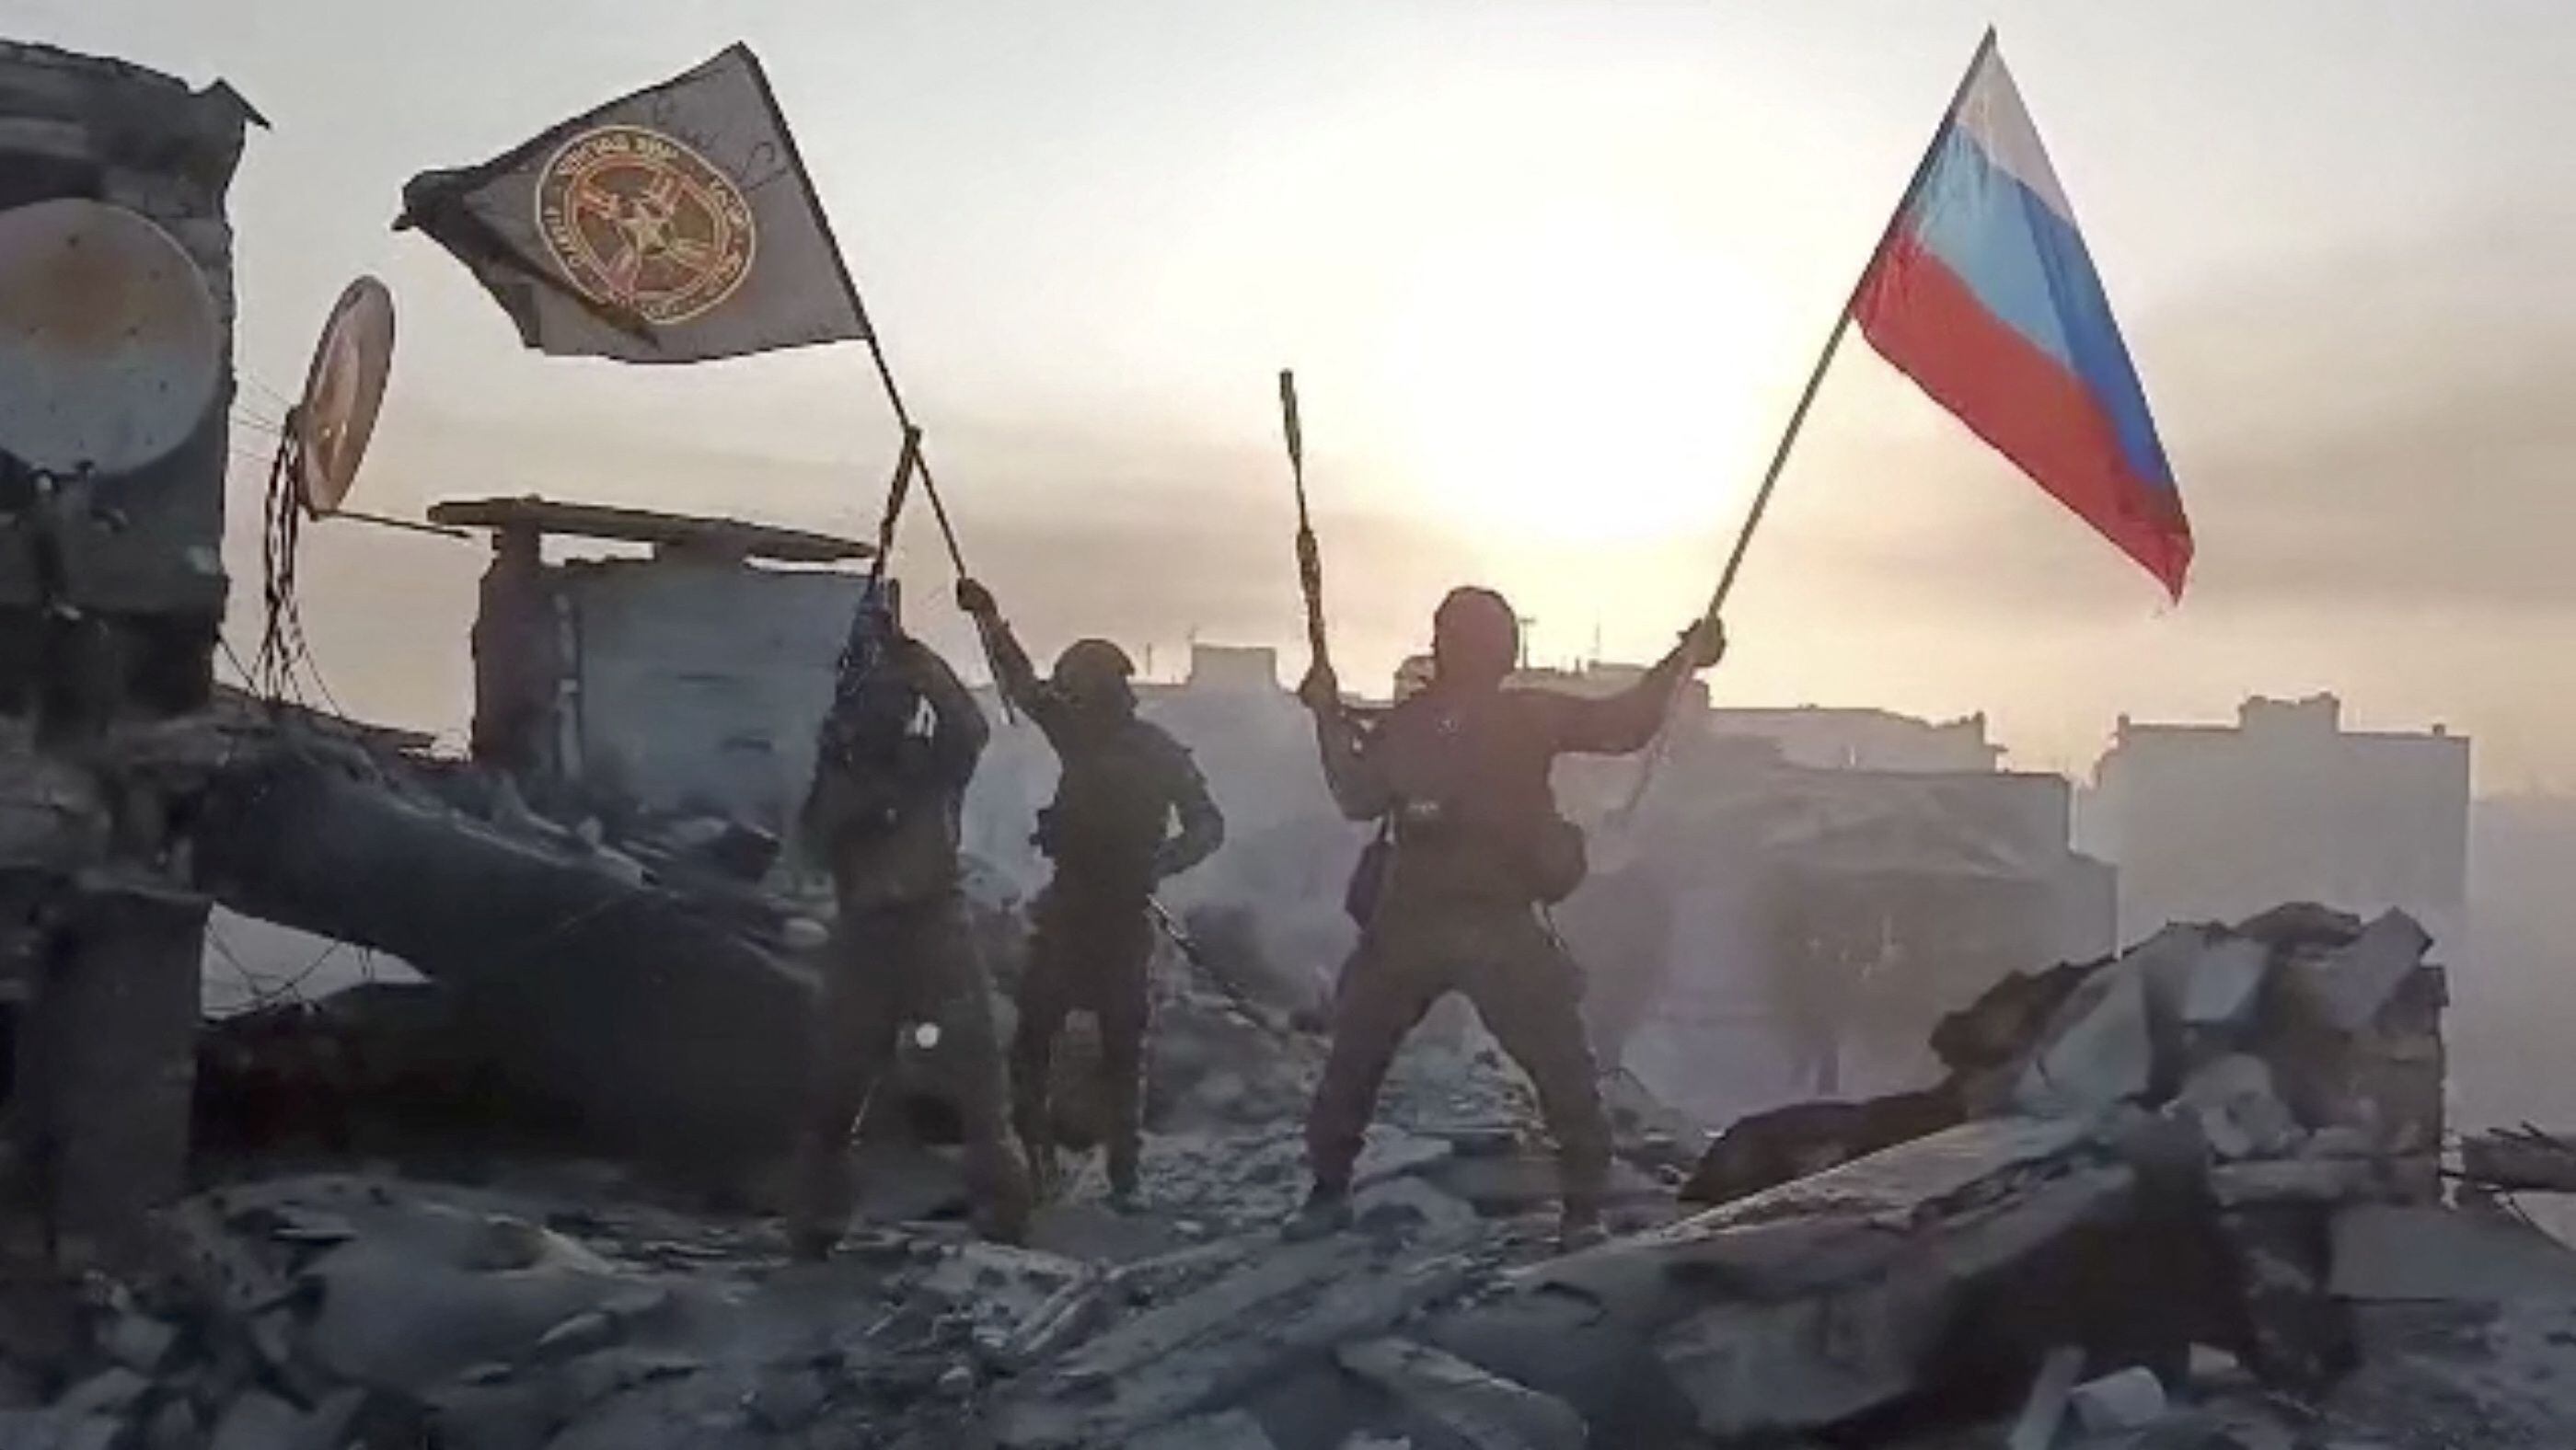 Wagner mercenary group fighters wave flags of Russia and Wagner group on the top of a building in an unidentified location in the course of Russia-Ukraine conflict, in this still image taken from video released on May 20, 2023, along with a statement by Russian mercenary chief Yevgeny Prigozhin about taking full control of the Ukrainian city of Bakhmut. Press service of "Concord"/Handout via REUTERS ATTENTION EDITORS - THIS IMAGE WAS PROVIDED BY A THIRD PARTY. NO RESALES. NO ARCHIVES. MANDATORY CREDIT.